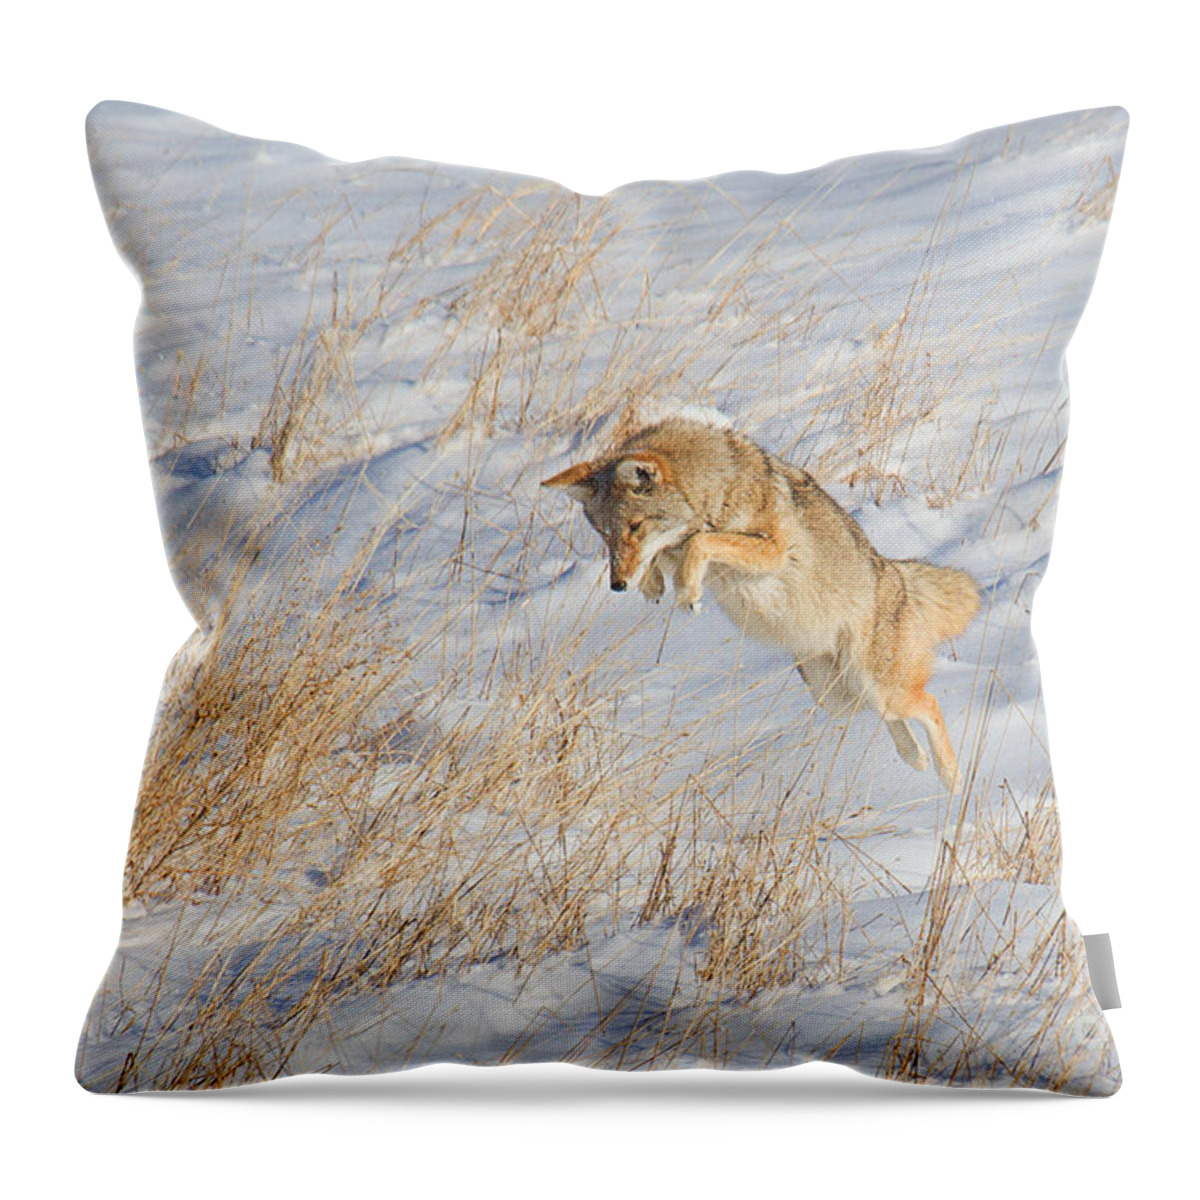 Coyote Throw Pillow featuring the photograph The High Jump by Jim Garrison